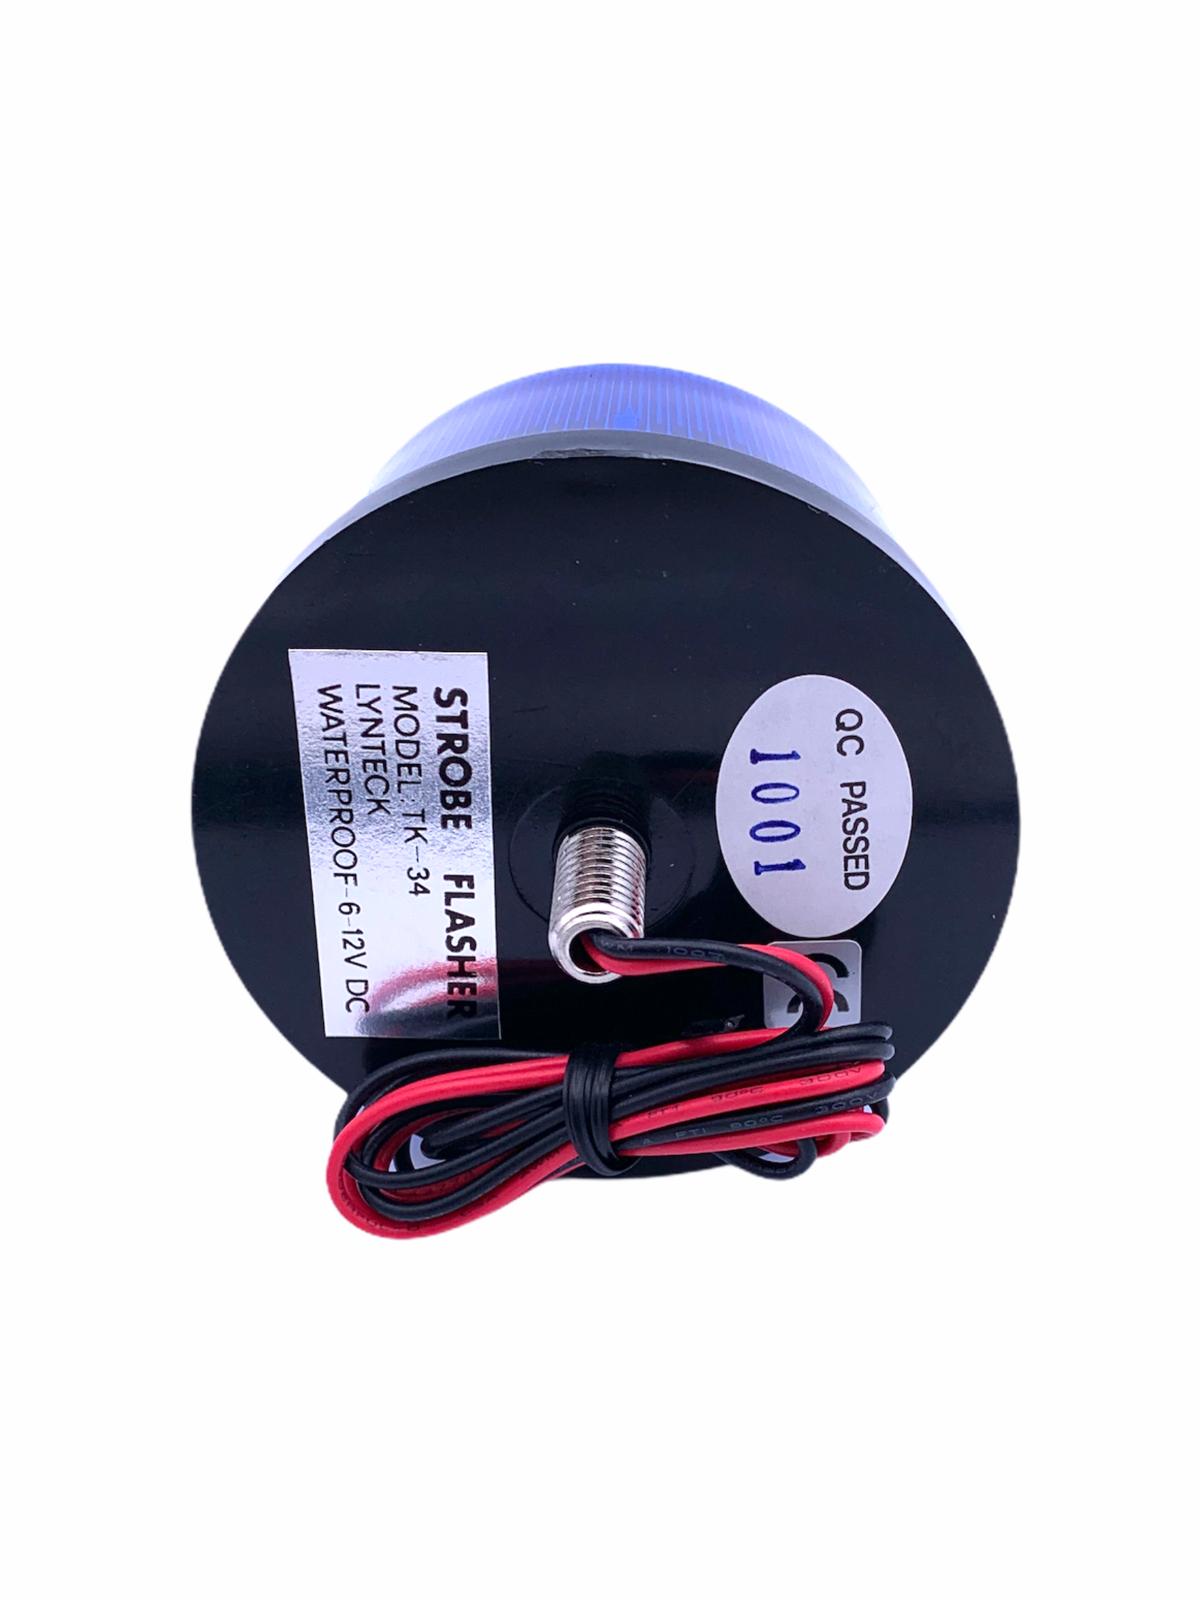 LYNTECK STROBE LED XENOX FLASHER BLUE RED TK-34 FOR SECURITY FIRE ALARM 